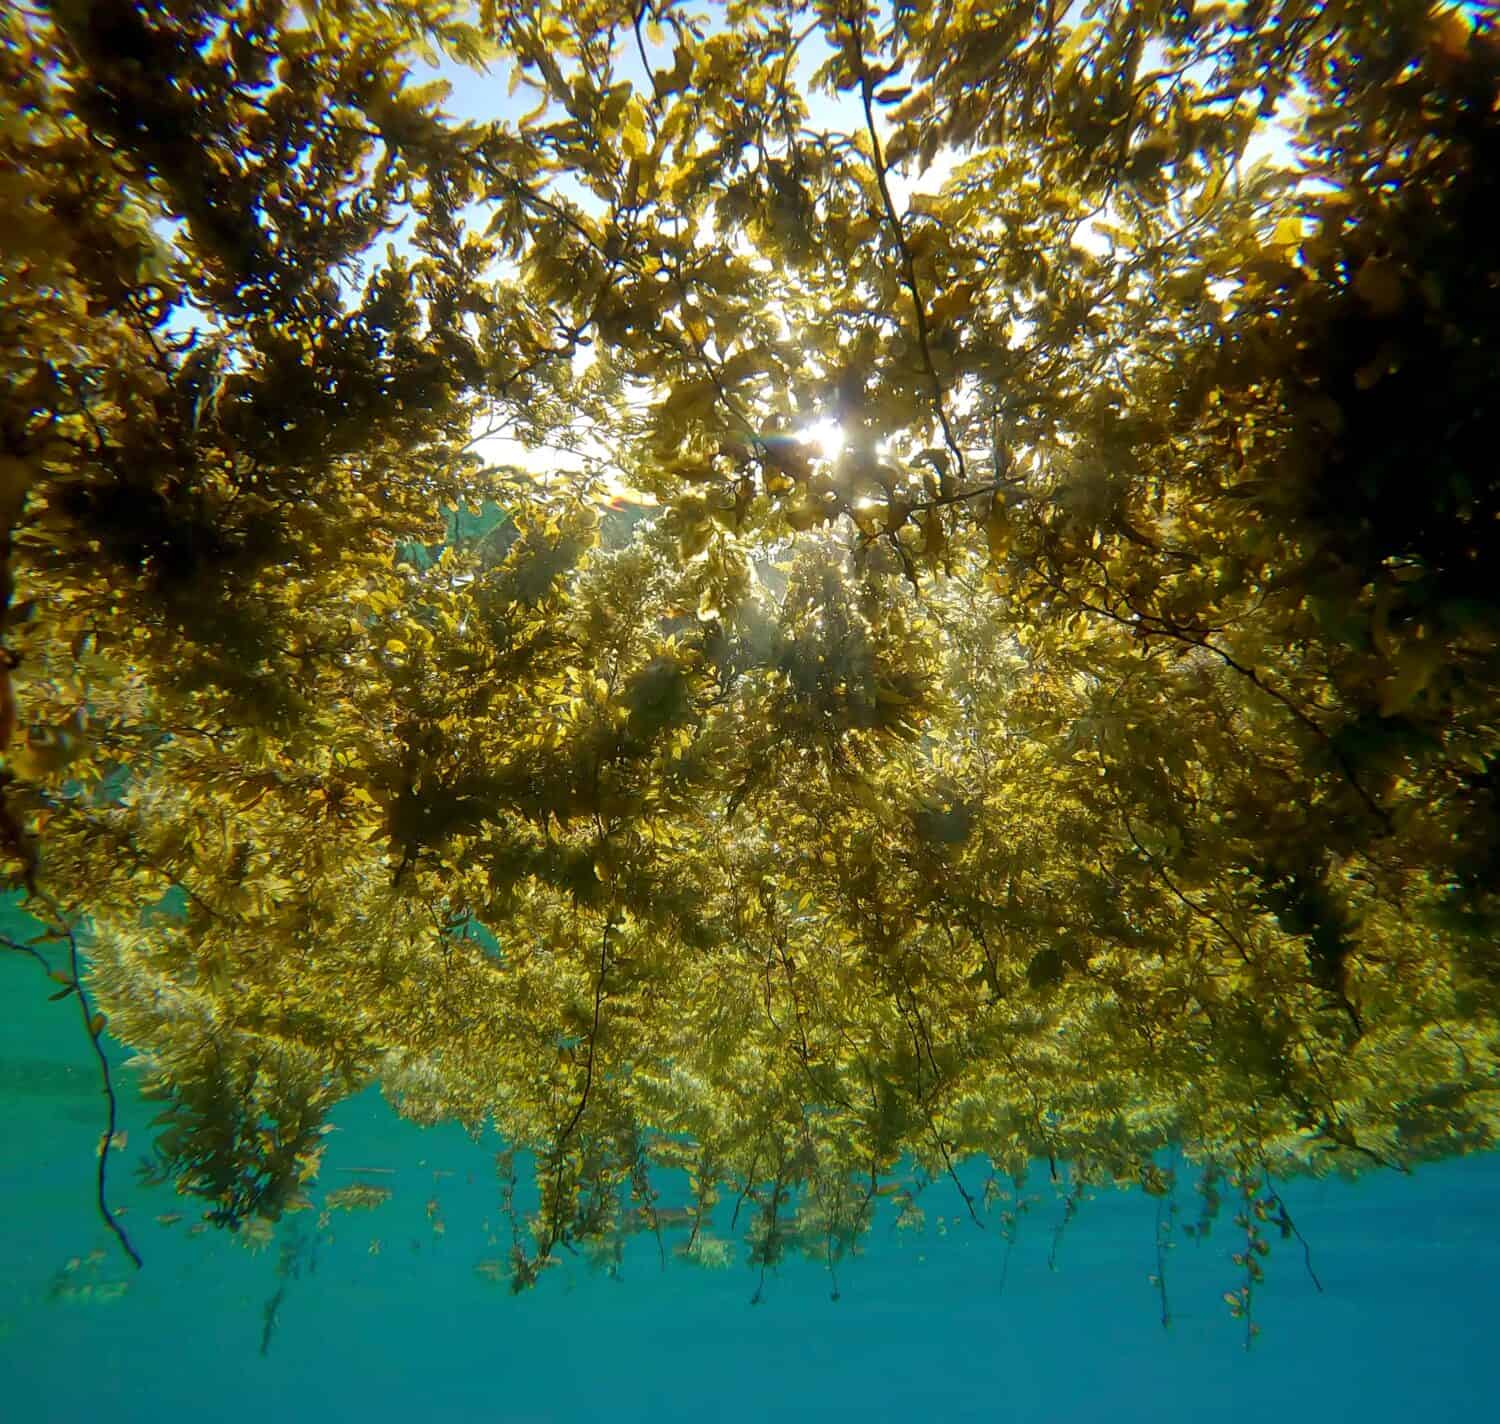 Islands of floating algae. Seaweed Brown Sargassum floating on surface of the water, sun's rays breaking through the thick grass. Underwater shot